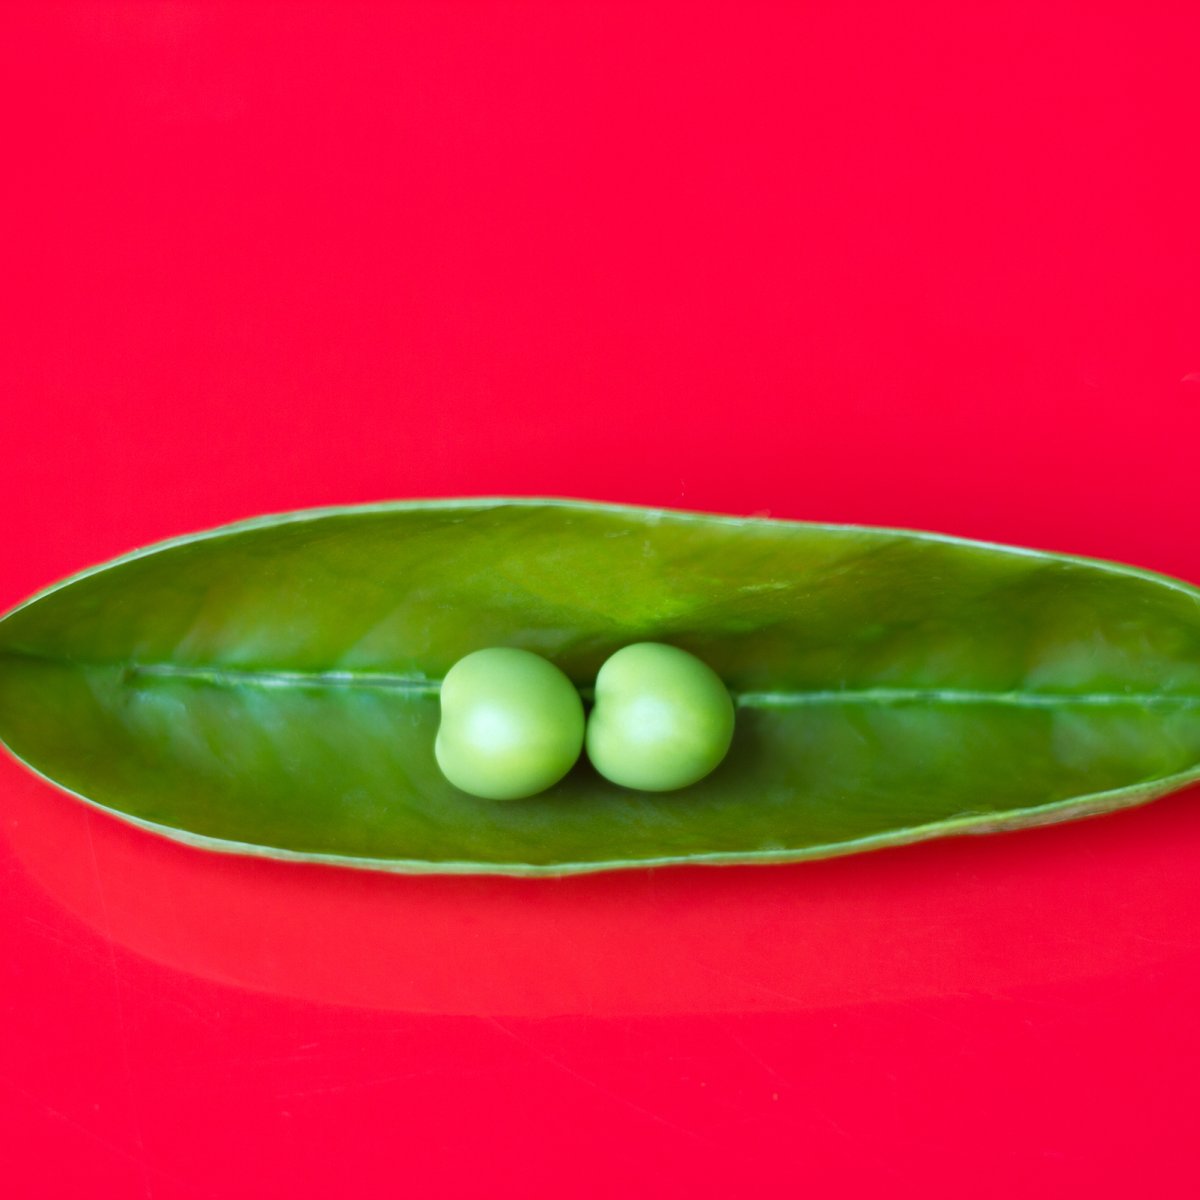 Two Perfect Peas in a Pod, Vibrant Red Background